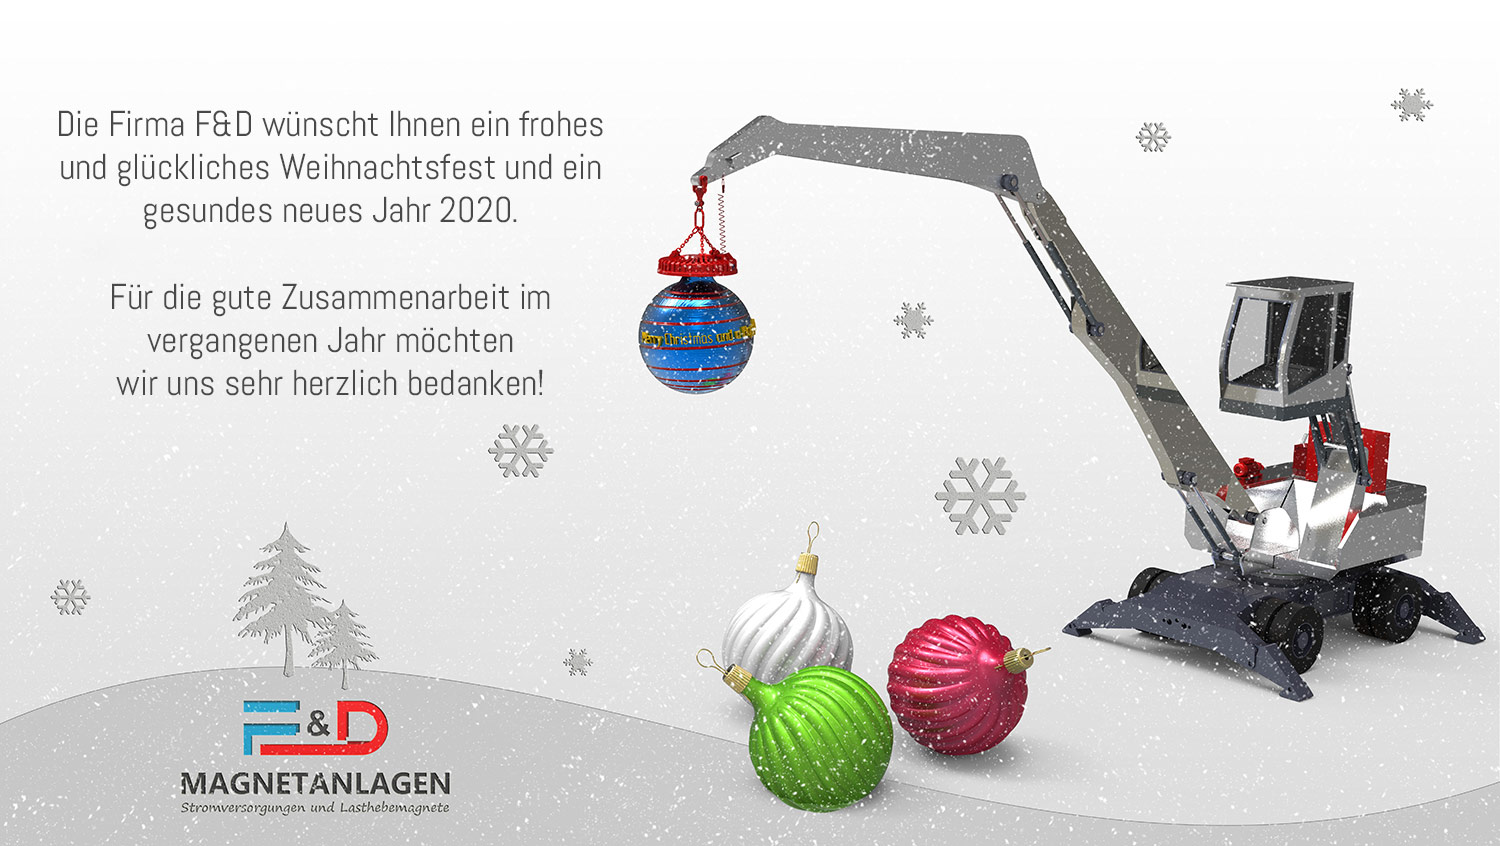 F&D Magnetanlagen wishes you a Merry Christmas and a Happy New Year